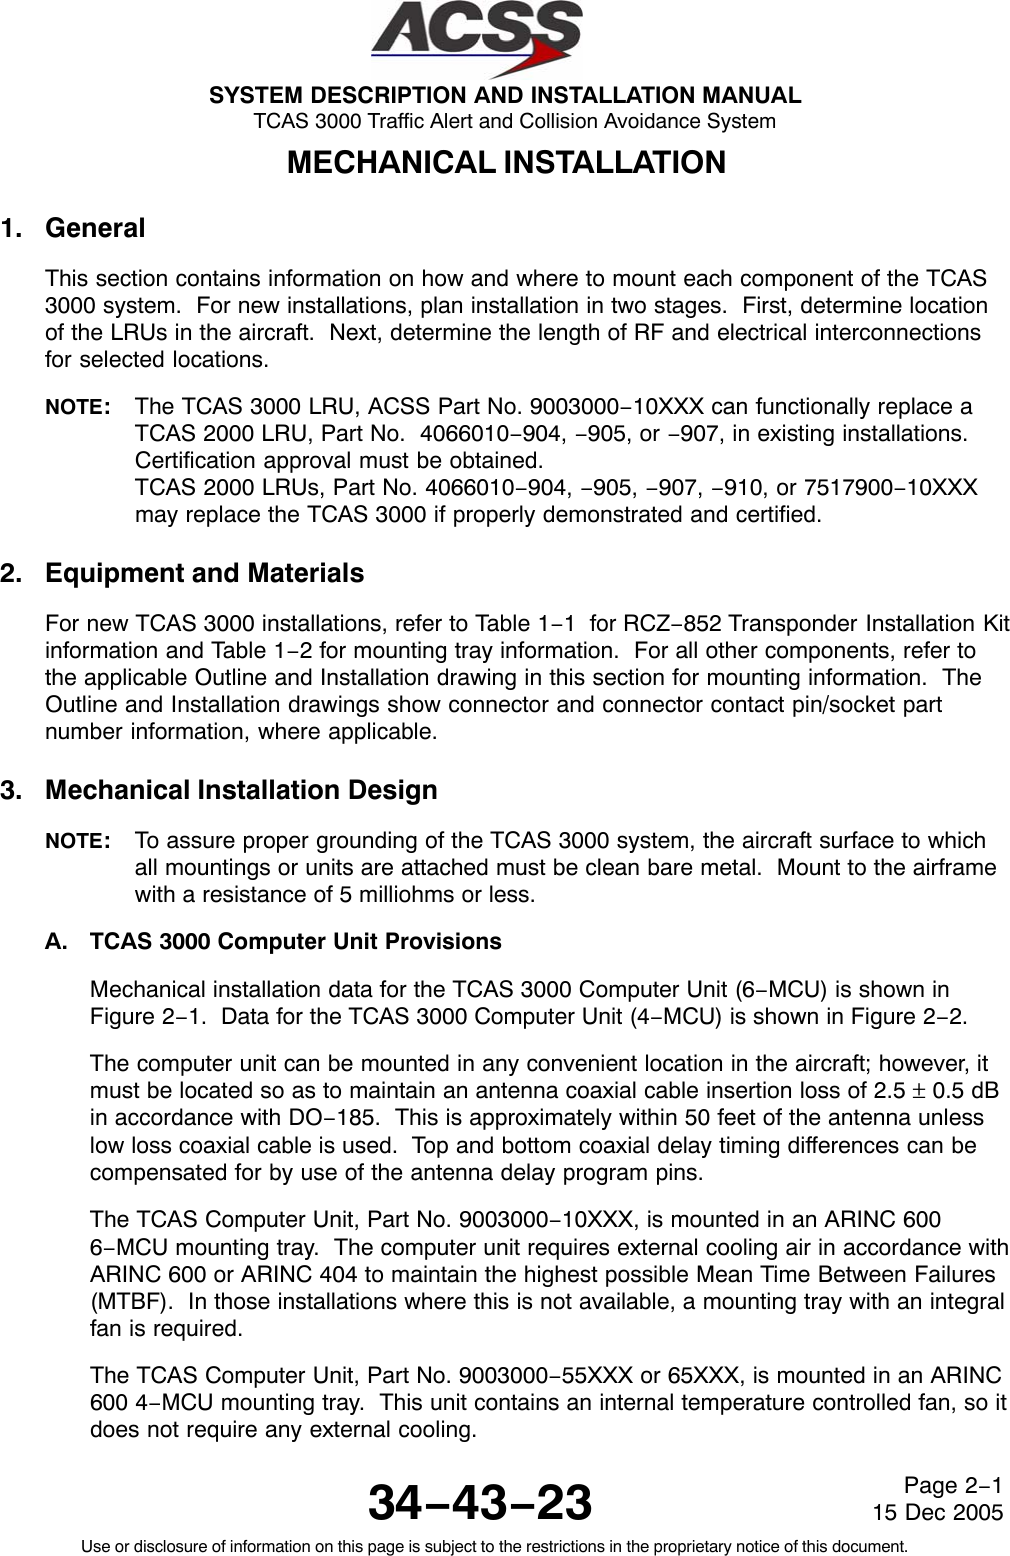 SYSTEM DESCRIPTION AND INSTALLATION MANUAL TCAS 3000 Traffic Alert and Collision Avoidance System34−43−23Use or disclosure of information on this page is subject to the restrictions in the proprietary notice of this document.Page 2−115 Dec 2005MECHANICAL INSTALLATION1. GeneralThis section contains information on how and where to mount each component of the TCAS3000 system.  For new installations, plan installation in two stages.  First, determine locationof the LRUs in the aircraft.  Next, determine the length of RF and electrical interconnectionsfor selected locations.NOTE:The TCAS 3000 LRU, ACSS Part No. 9003000−10XXX can functionally replace aTCAS 2000 LRU, Part No.  4066010−904, −905, or −907, in existing installations.Certification approval must be obtained.TCAS 2000 LRUs, Part No. 4066010−904, −905, −907, −910, or 7517900−10XXXmay replace the TCAS 3000 if properly demonstrated and certified.2. Equipment and MaterialsFor new TCAS 3000 installations, refer to Table 1−1  for RCZ−852 Transponder Installation Kitinformation and Table 1−2 for mounting tray information.  For all other components, refer tothe applicable Outline and Installation drawing in this section for mounting information.  TheOutline and Installation drawings show connector and connector contact pin/socket partnumber information, where applicable.3. Mechanical Installation DesignNOTE:To assure proper grounding of the TCAS 3000 system, the aircraft surface to whichall mountings or units are attached must be clean bare metal.  Mount to the airframewith a resistance of 5 milliohms or less.A. TCAS 3000 Computer Unit ProvisionsMechanical installation data for the TCAS 3000 Computer Unit (6−MCU) is shown inFigure 2−1.  Data for the TCAS 3000 Computer Unit (4−MCU) is shown in Figure 2−2.The computer unit can be mounted in any convenient location in the aircraft; however, itmust be located so as to maintain an antenna coaxial cable insertion loss of 2.5 ± 0.5 dBin accordance with DO−185.  This is approximately within 50 feet of the antenna unlesslow loss coaxial cable is used.  Top and bottom coaxial delay timing differences can becompensated for by use of the antenna delay program pins.The TCAS Computer Unit, Part No. 9003000−10XXX, is mounted in an ARINC 6006−MCU mounting tray.  The computer unit requires external cooling air in accordance withARINC 600 or ARINC 404 to maintain the highest possible Mean Time Between Failures(MTBF).  In those installations where this is not available, a mounting tray with an integralfan is required.The TCAS Computer Unit, Part No. 9003000−55XXX or 65XXX, is mounted in an ARINC600 4−MCU mounting tray.  This unit contains an internal temperature controlled fan, so itdoes not require any external cooling.